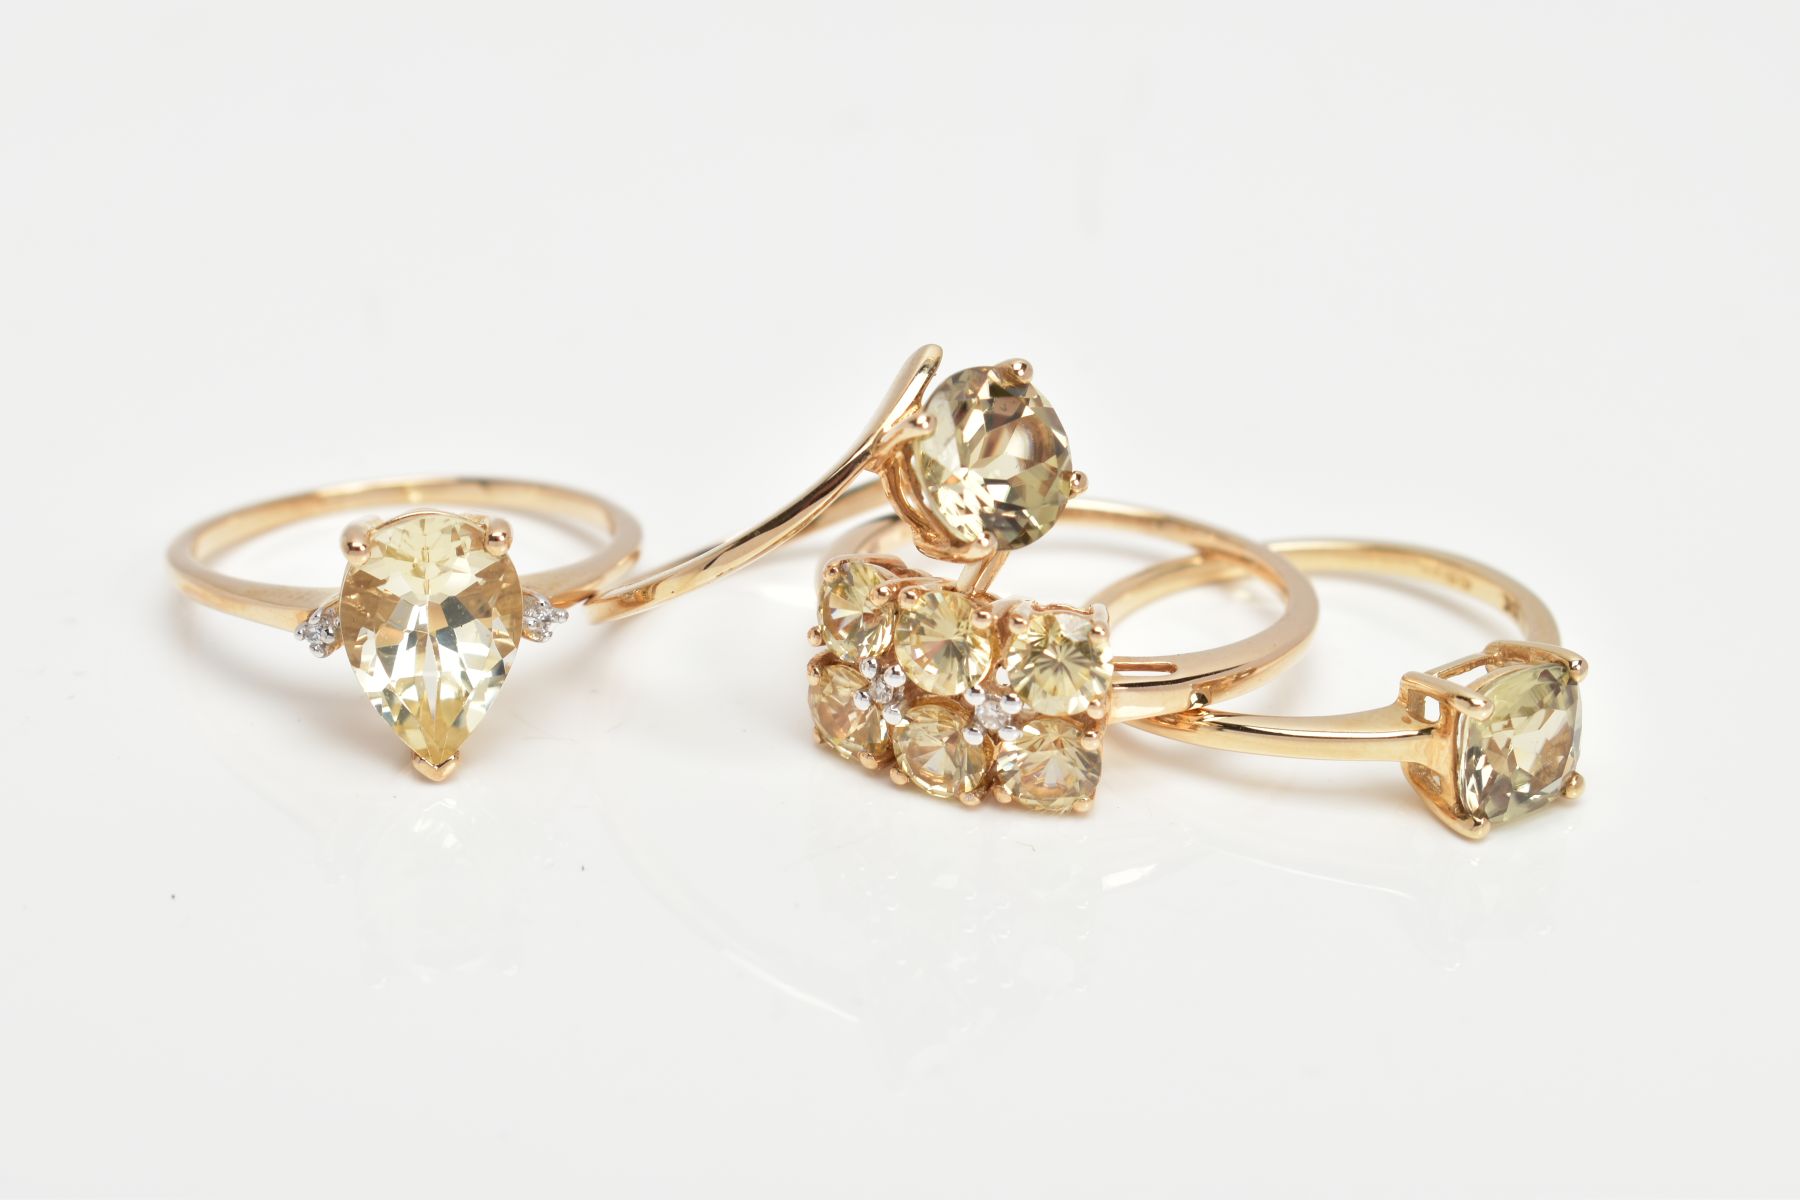 FOUR 9CT GOLD GEM SET DRESS RINGS, each set with pale yellowish green stones (untested) of various - Image 2 of 3